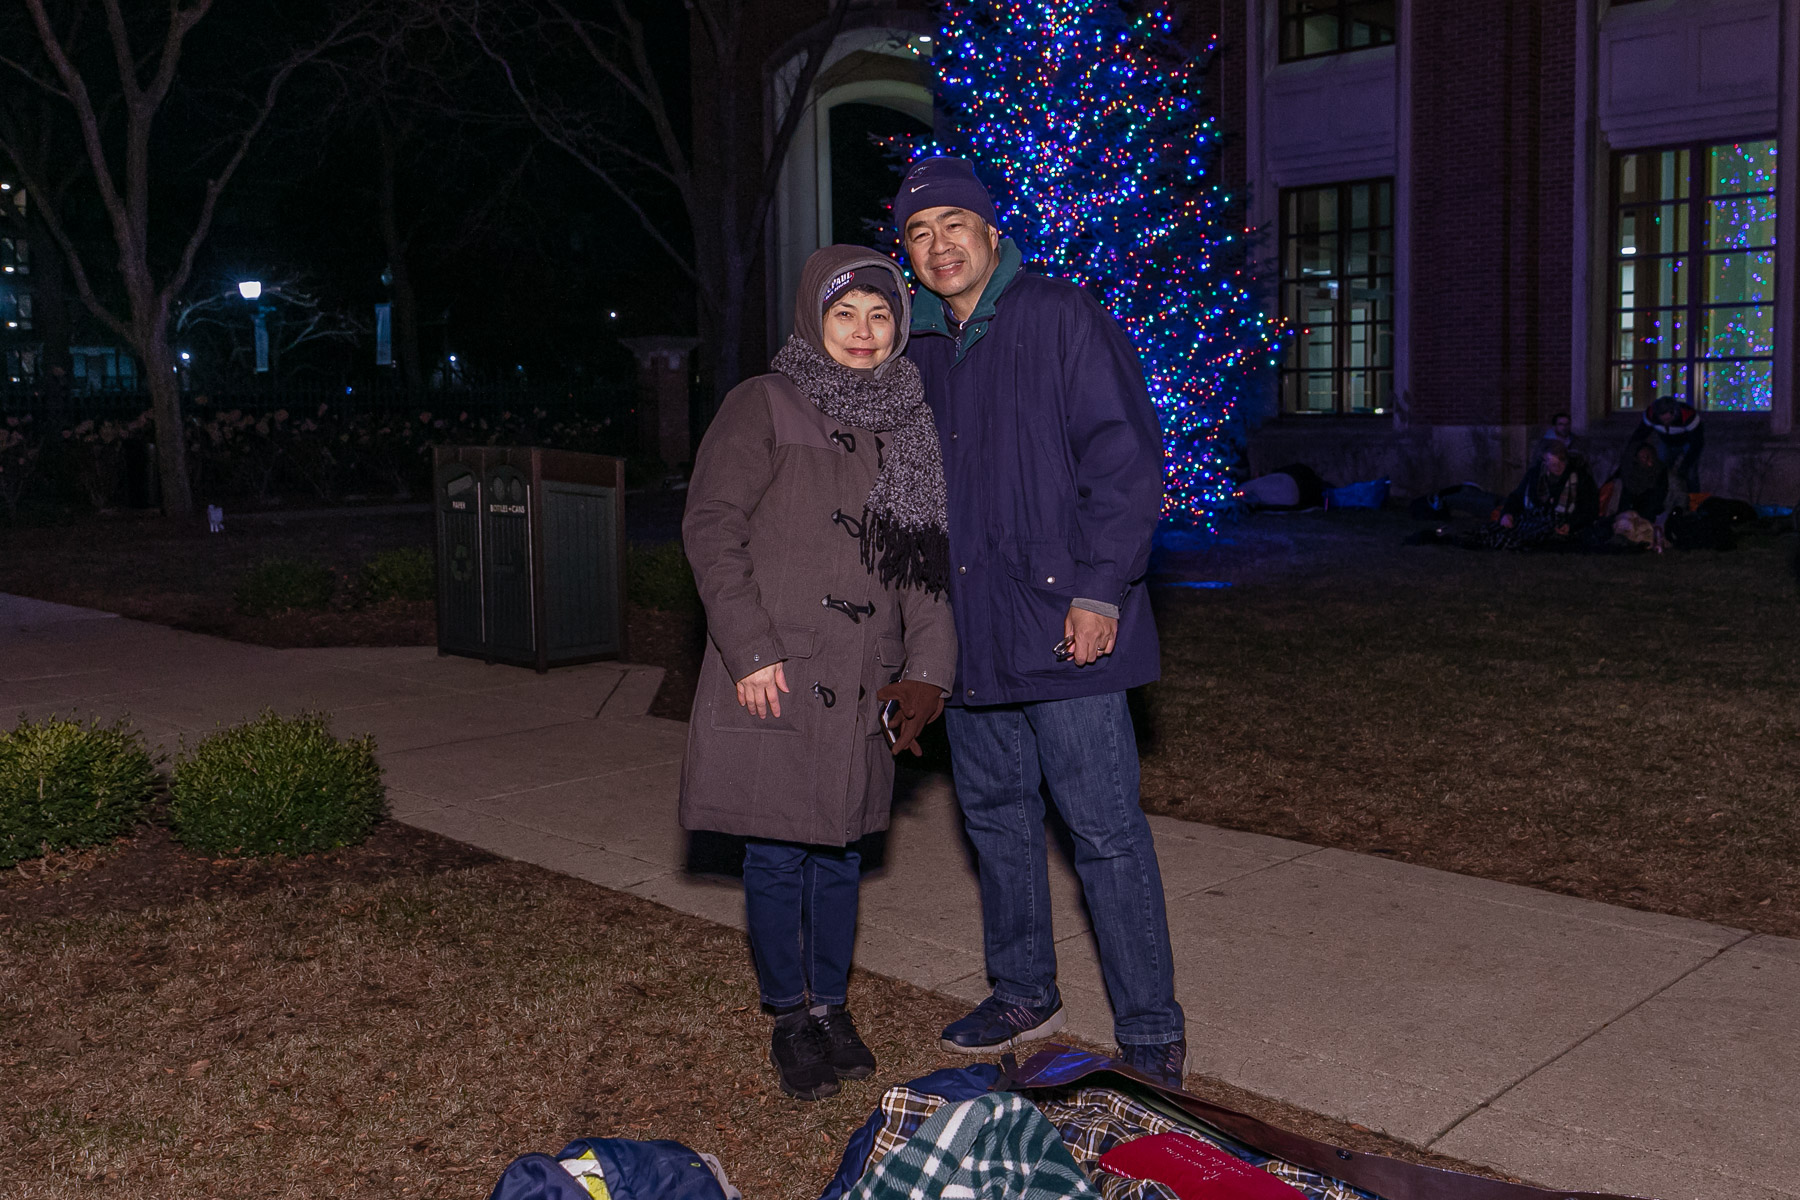 Dr. and Mrs. Esteban pose for a photo before hunkering down in St. Vincent’s Circle for the night. (DePaul University/Randall Spriggs)